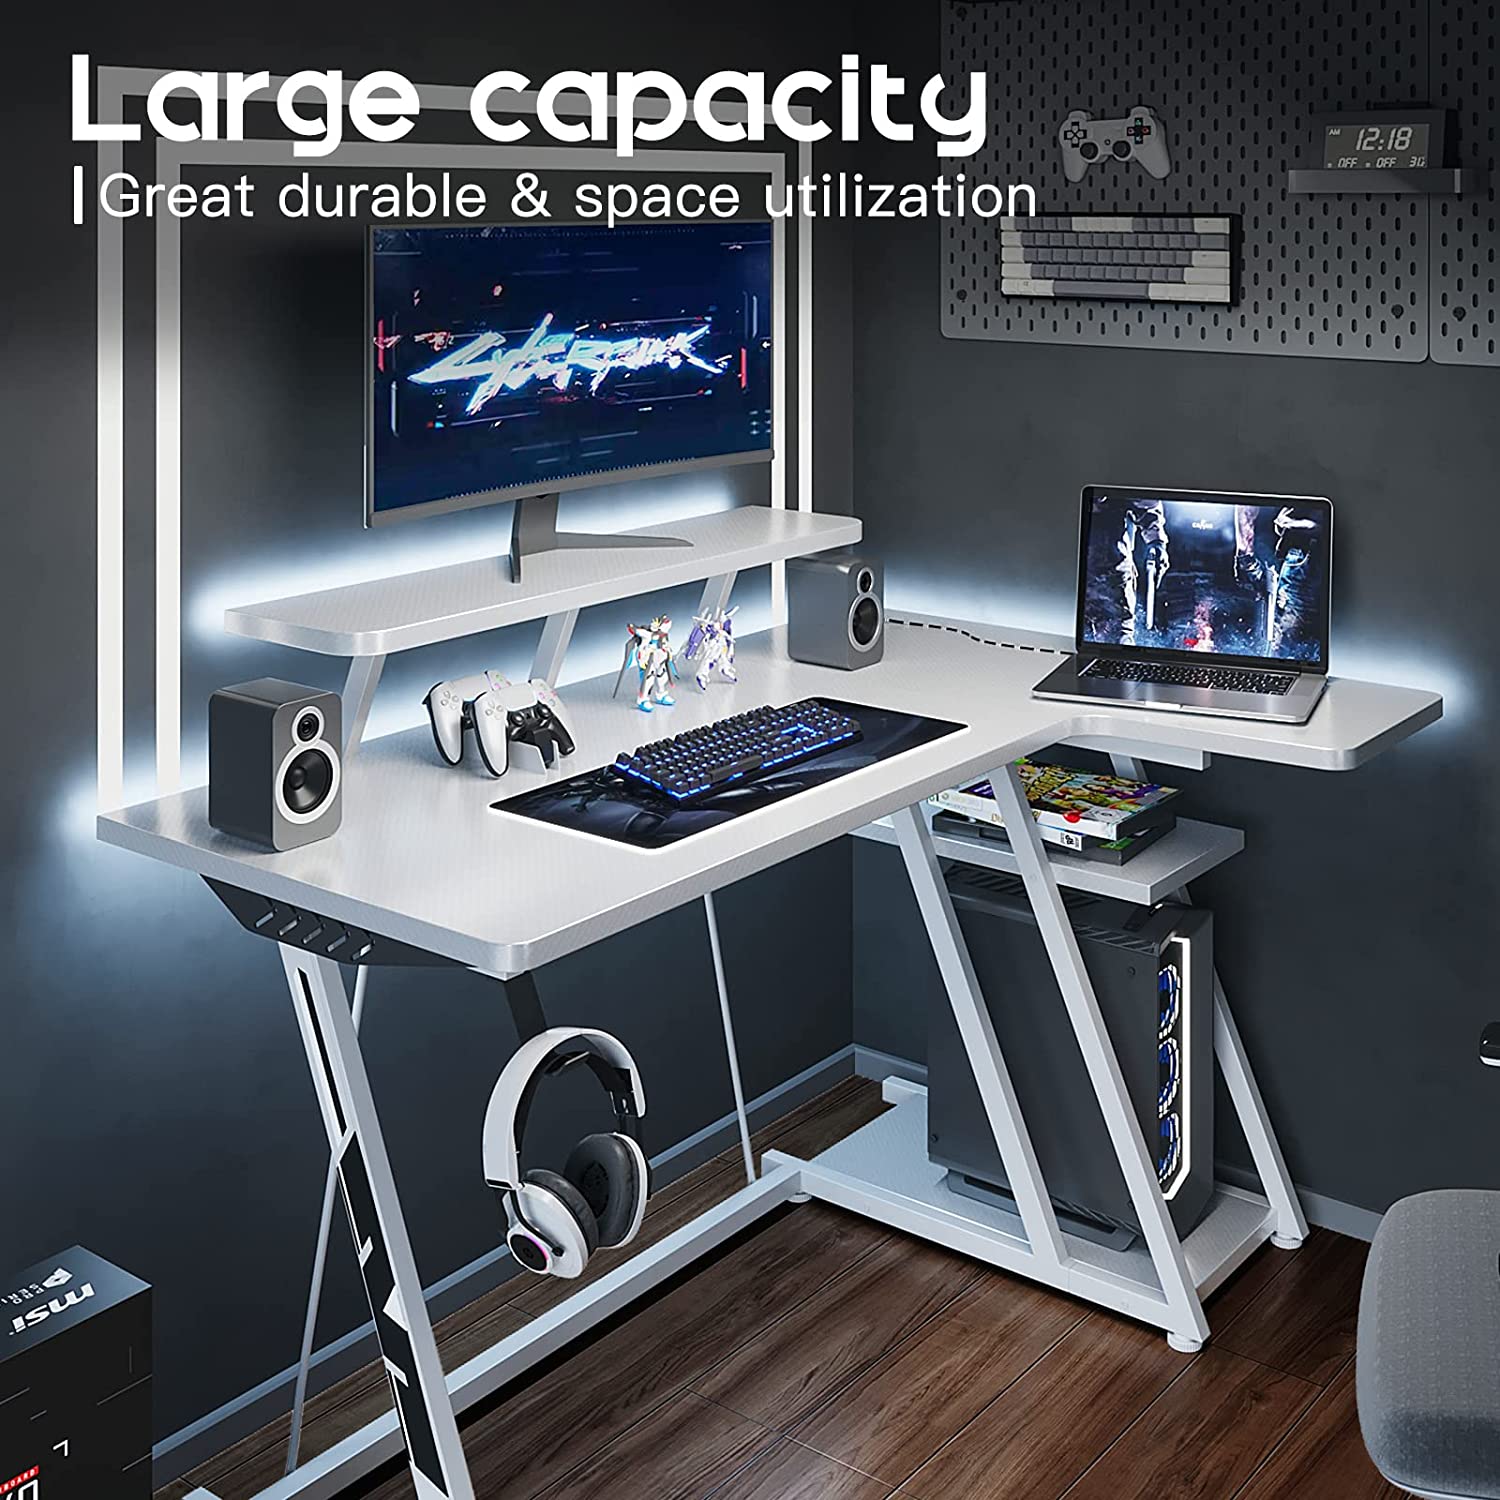 39 Inch L-Shaped Gaming Desk White, Carbon Fiber Surface& Power Outlets